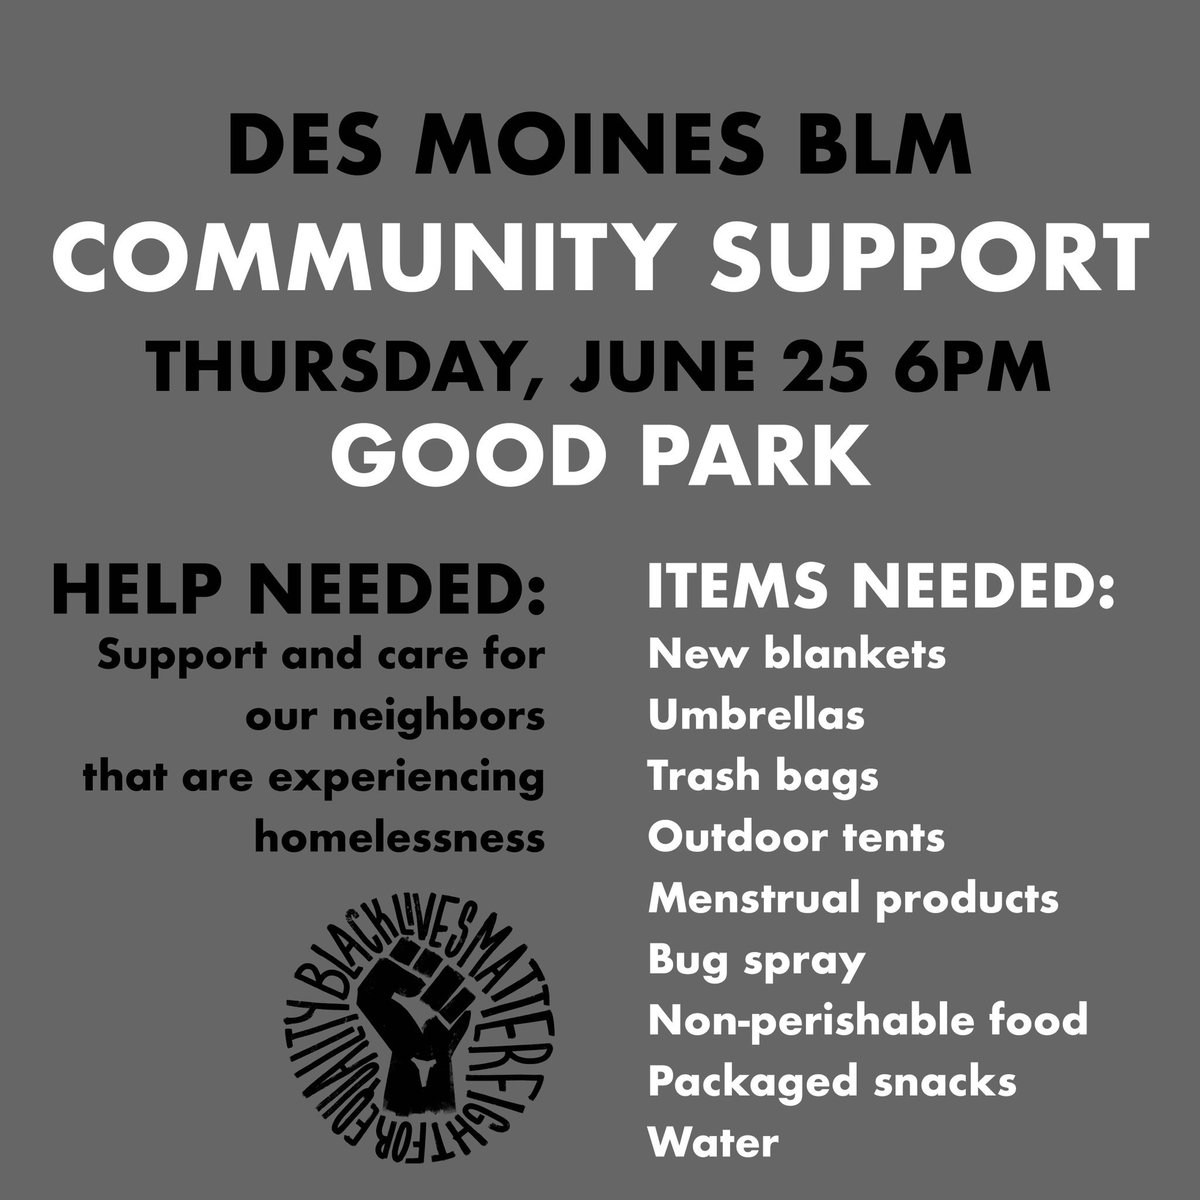 Des Moines family: can you join us tonight and bring (at least) one item to support the houseless community? See you at 6:00 at Good Park.